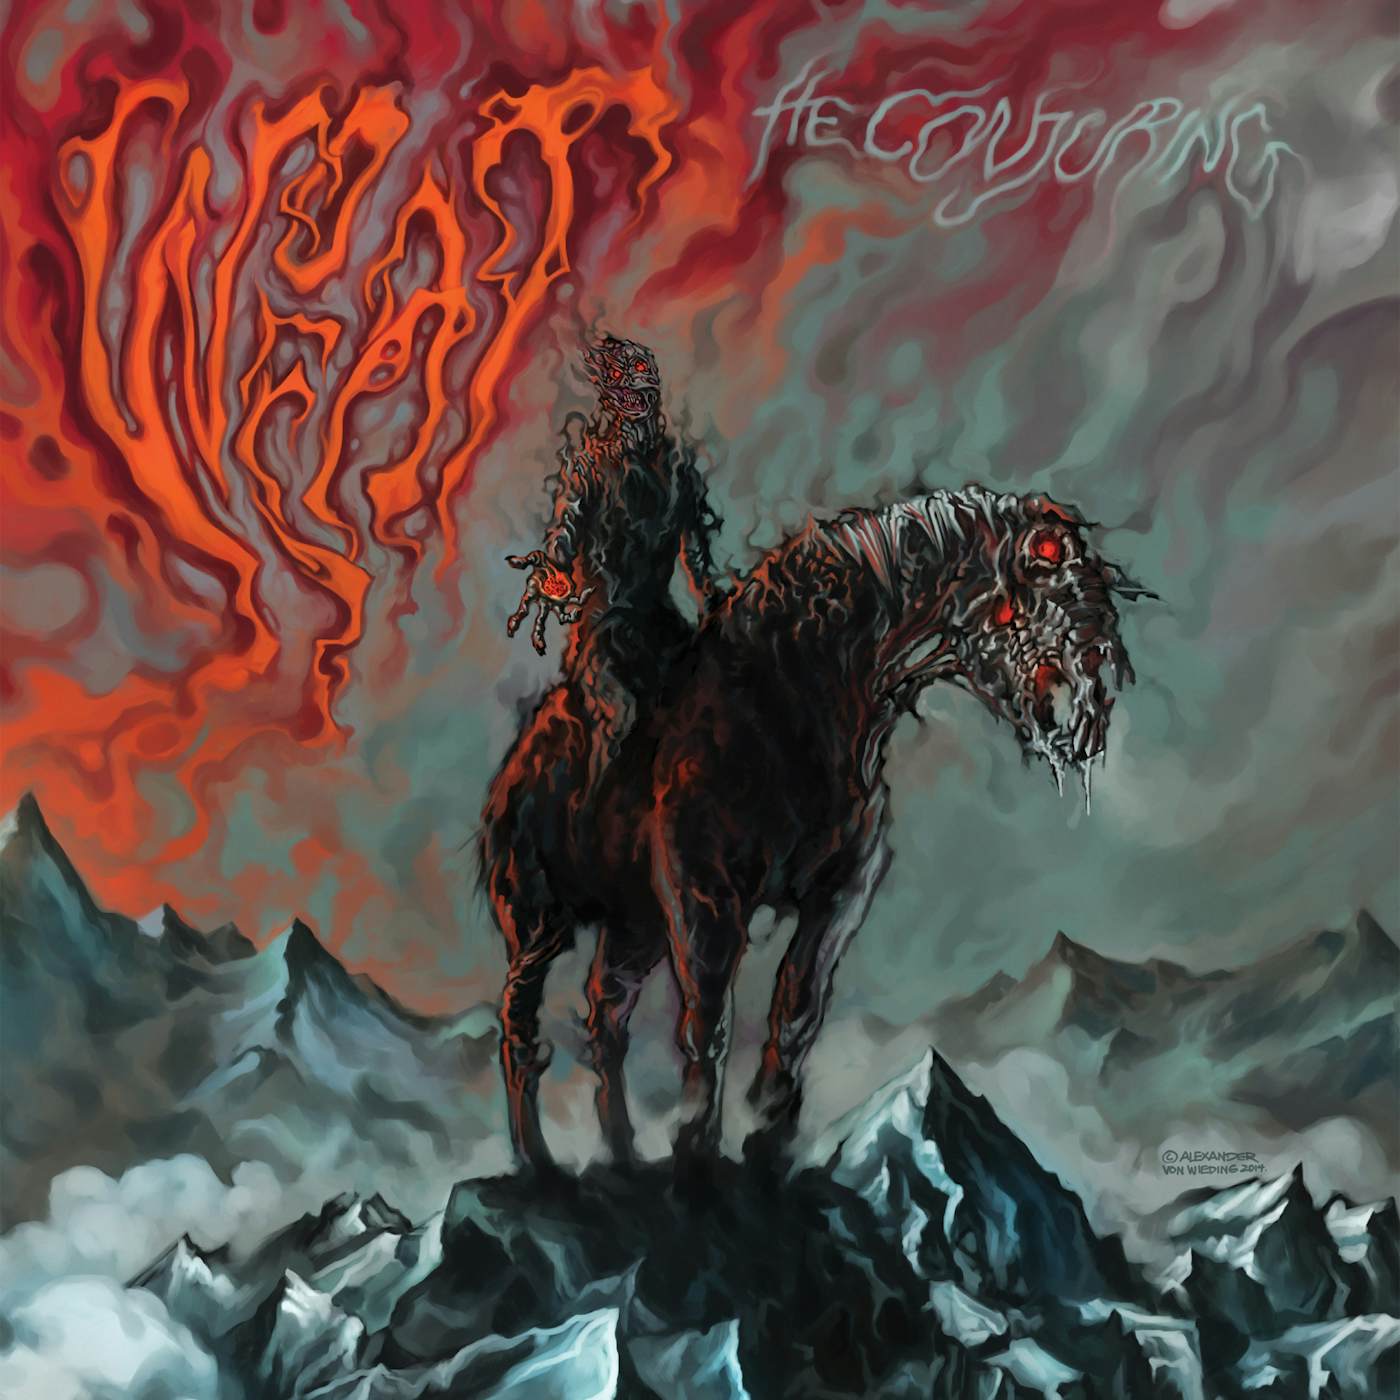 Wo Fat Conjuring CD